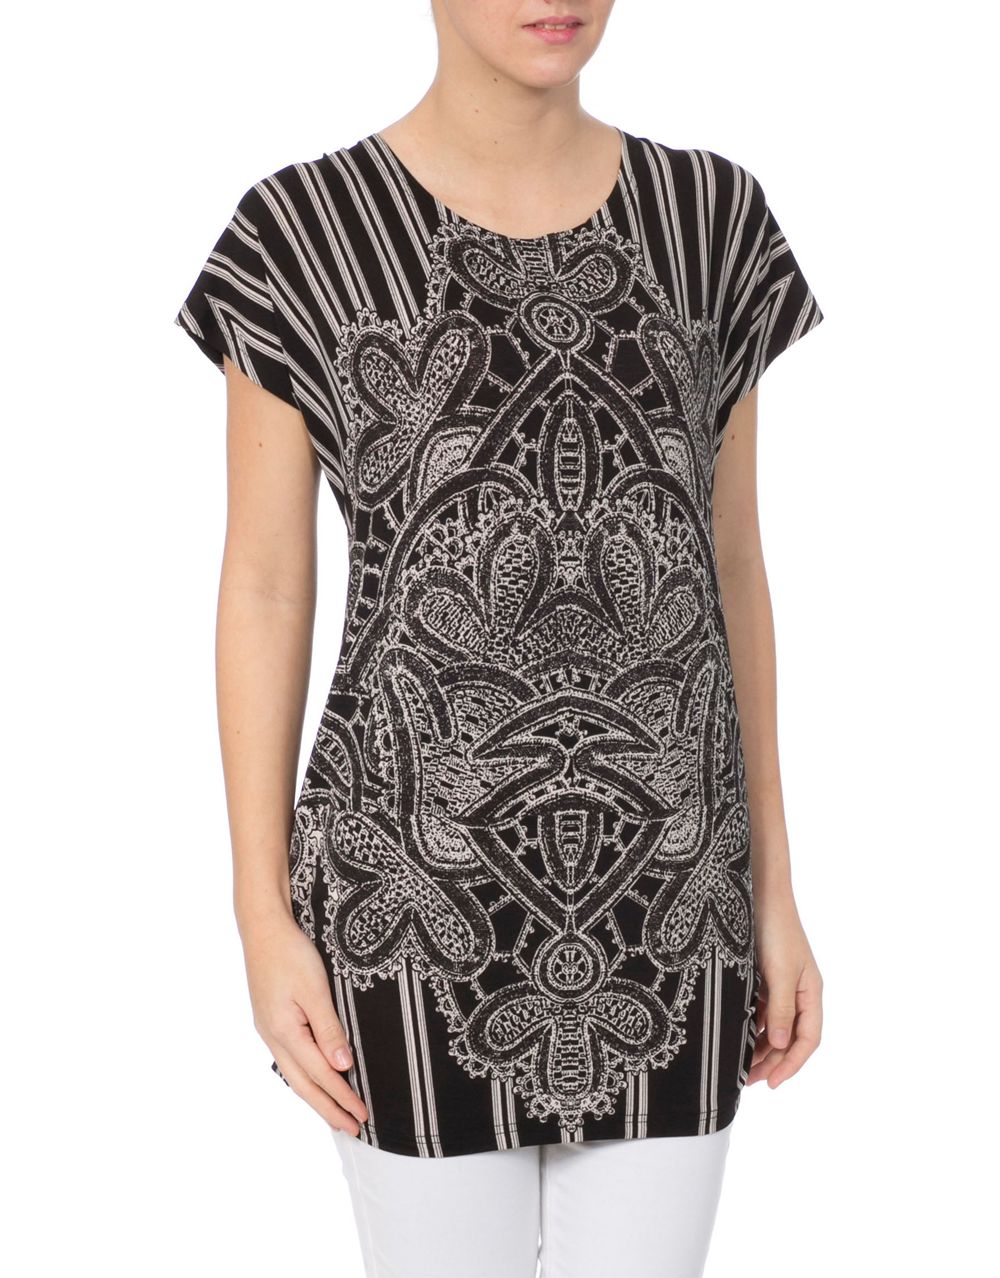 Monochrome Placement Printed Tunic